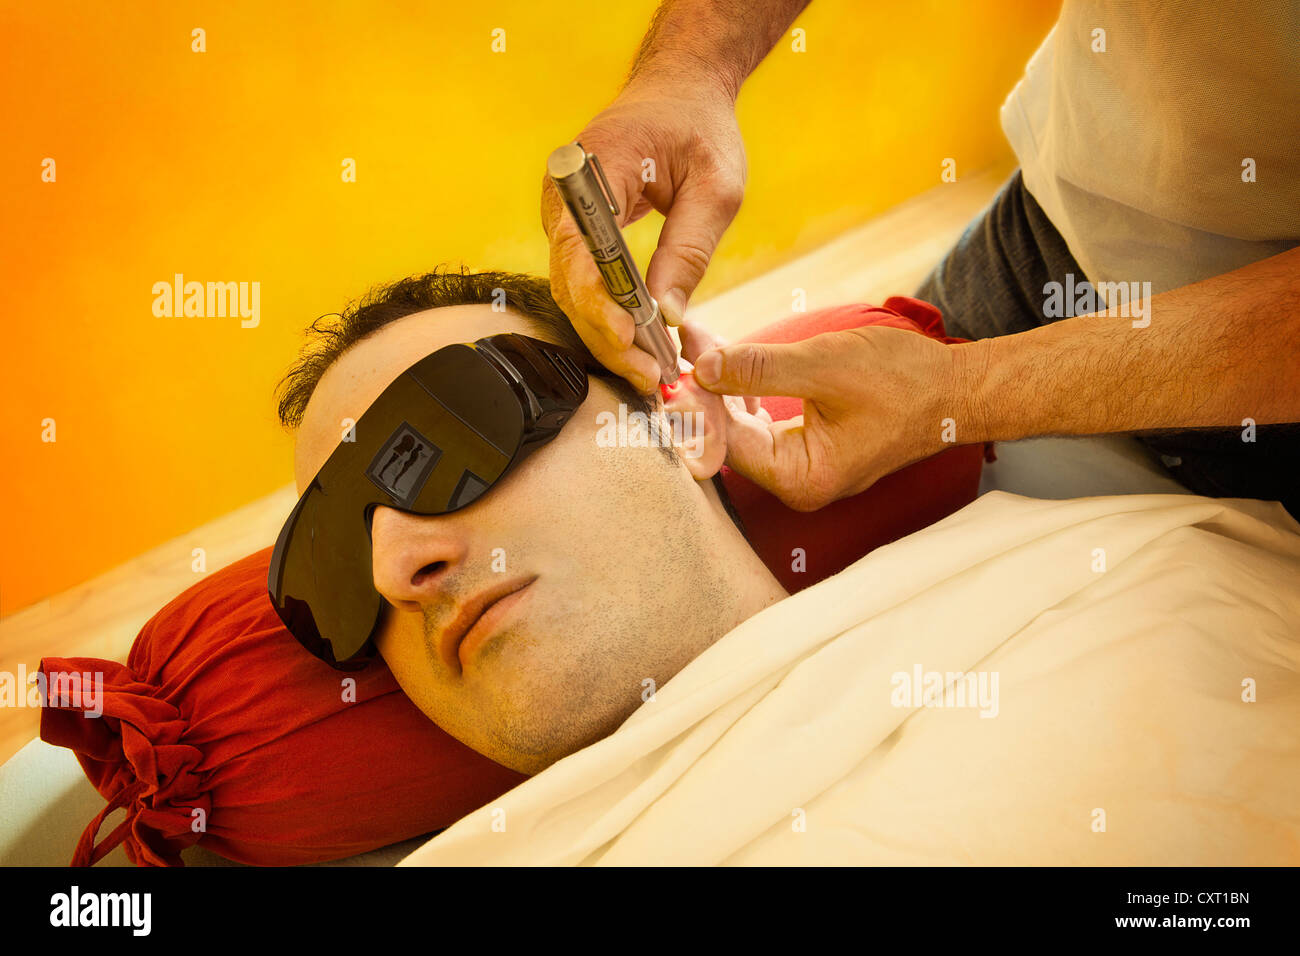 Laser treatment, patients wearing safety glasses Stock Photo